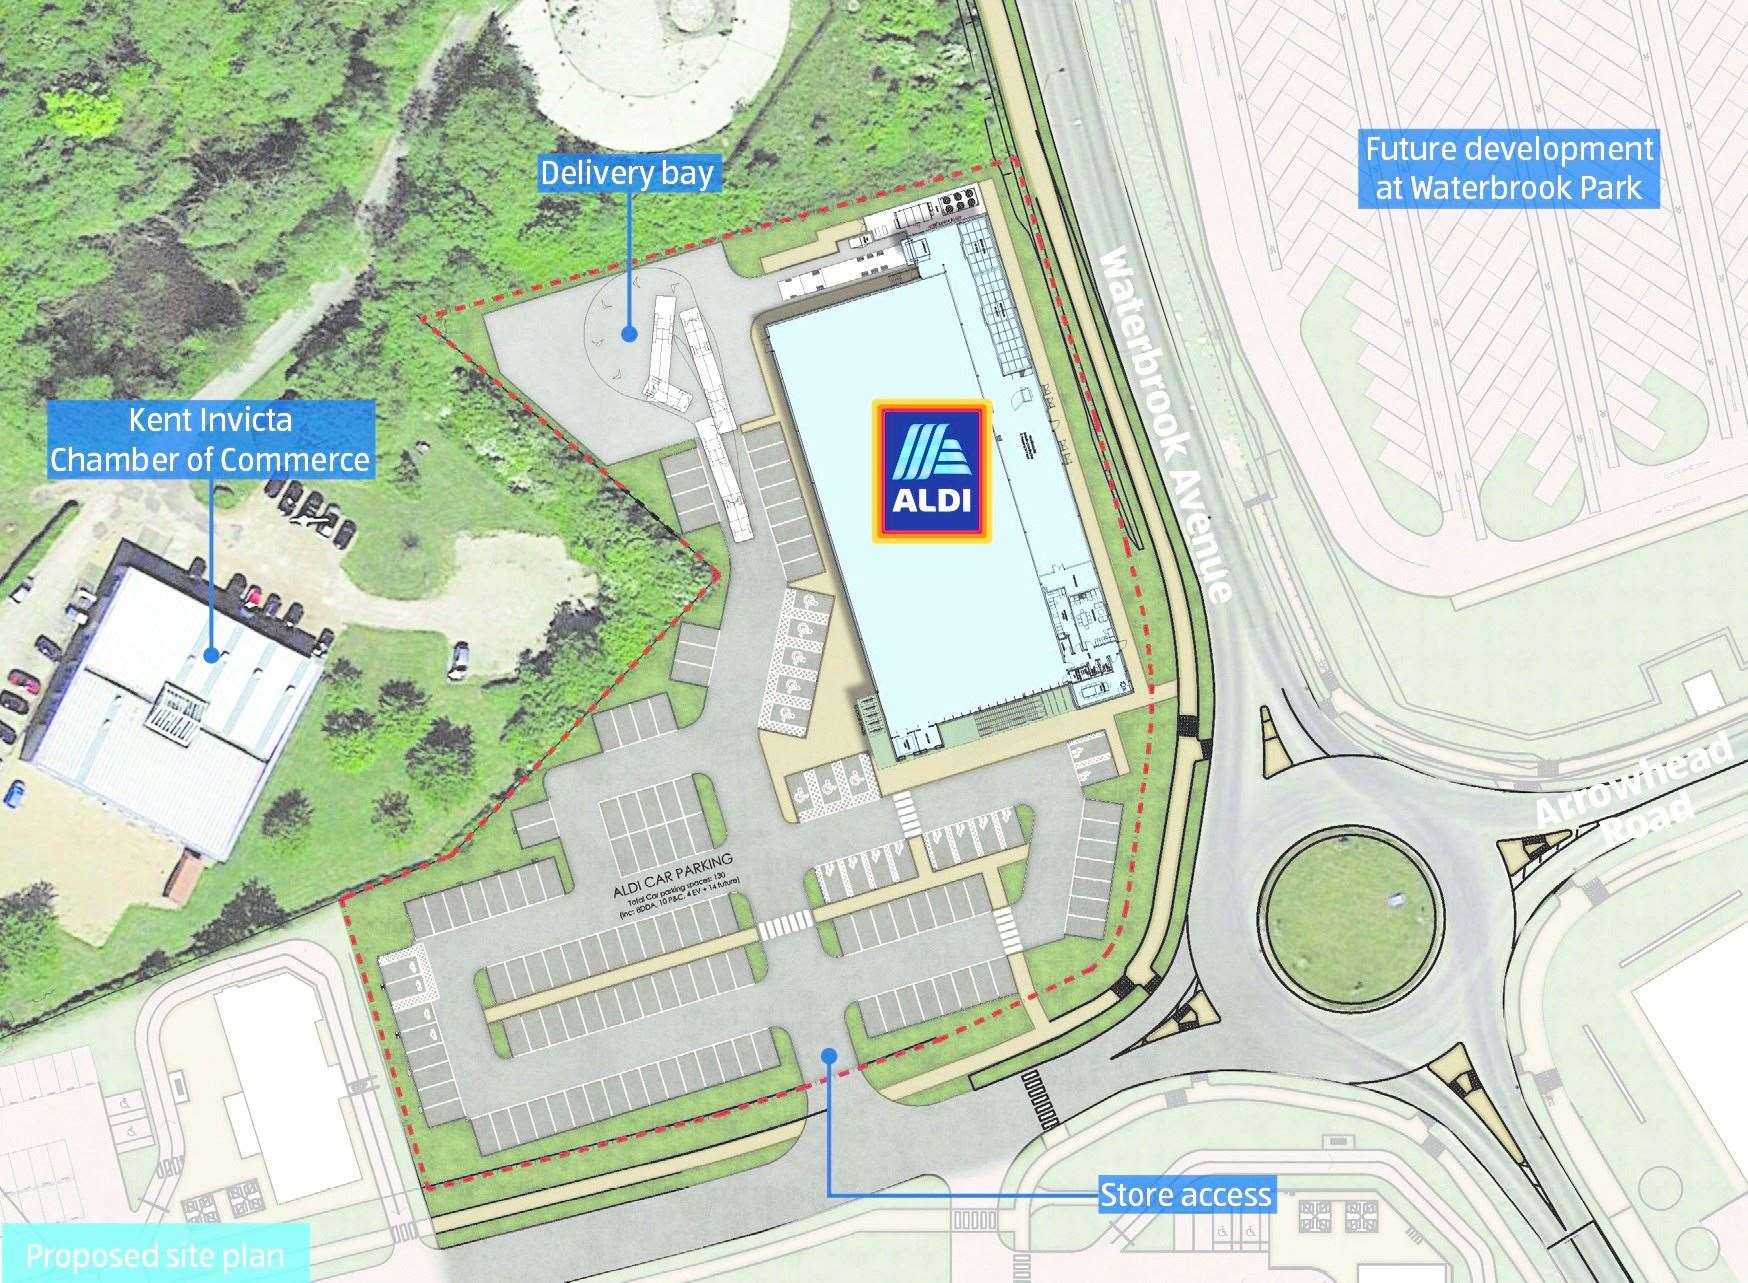 The Aldi will be located off Waterbrook Avenue